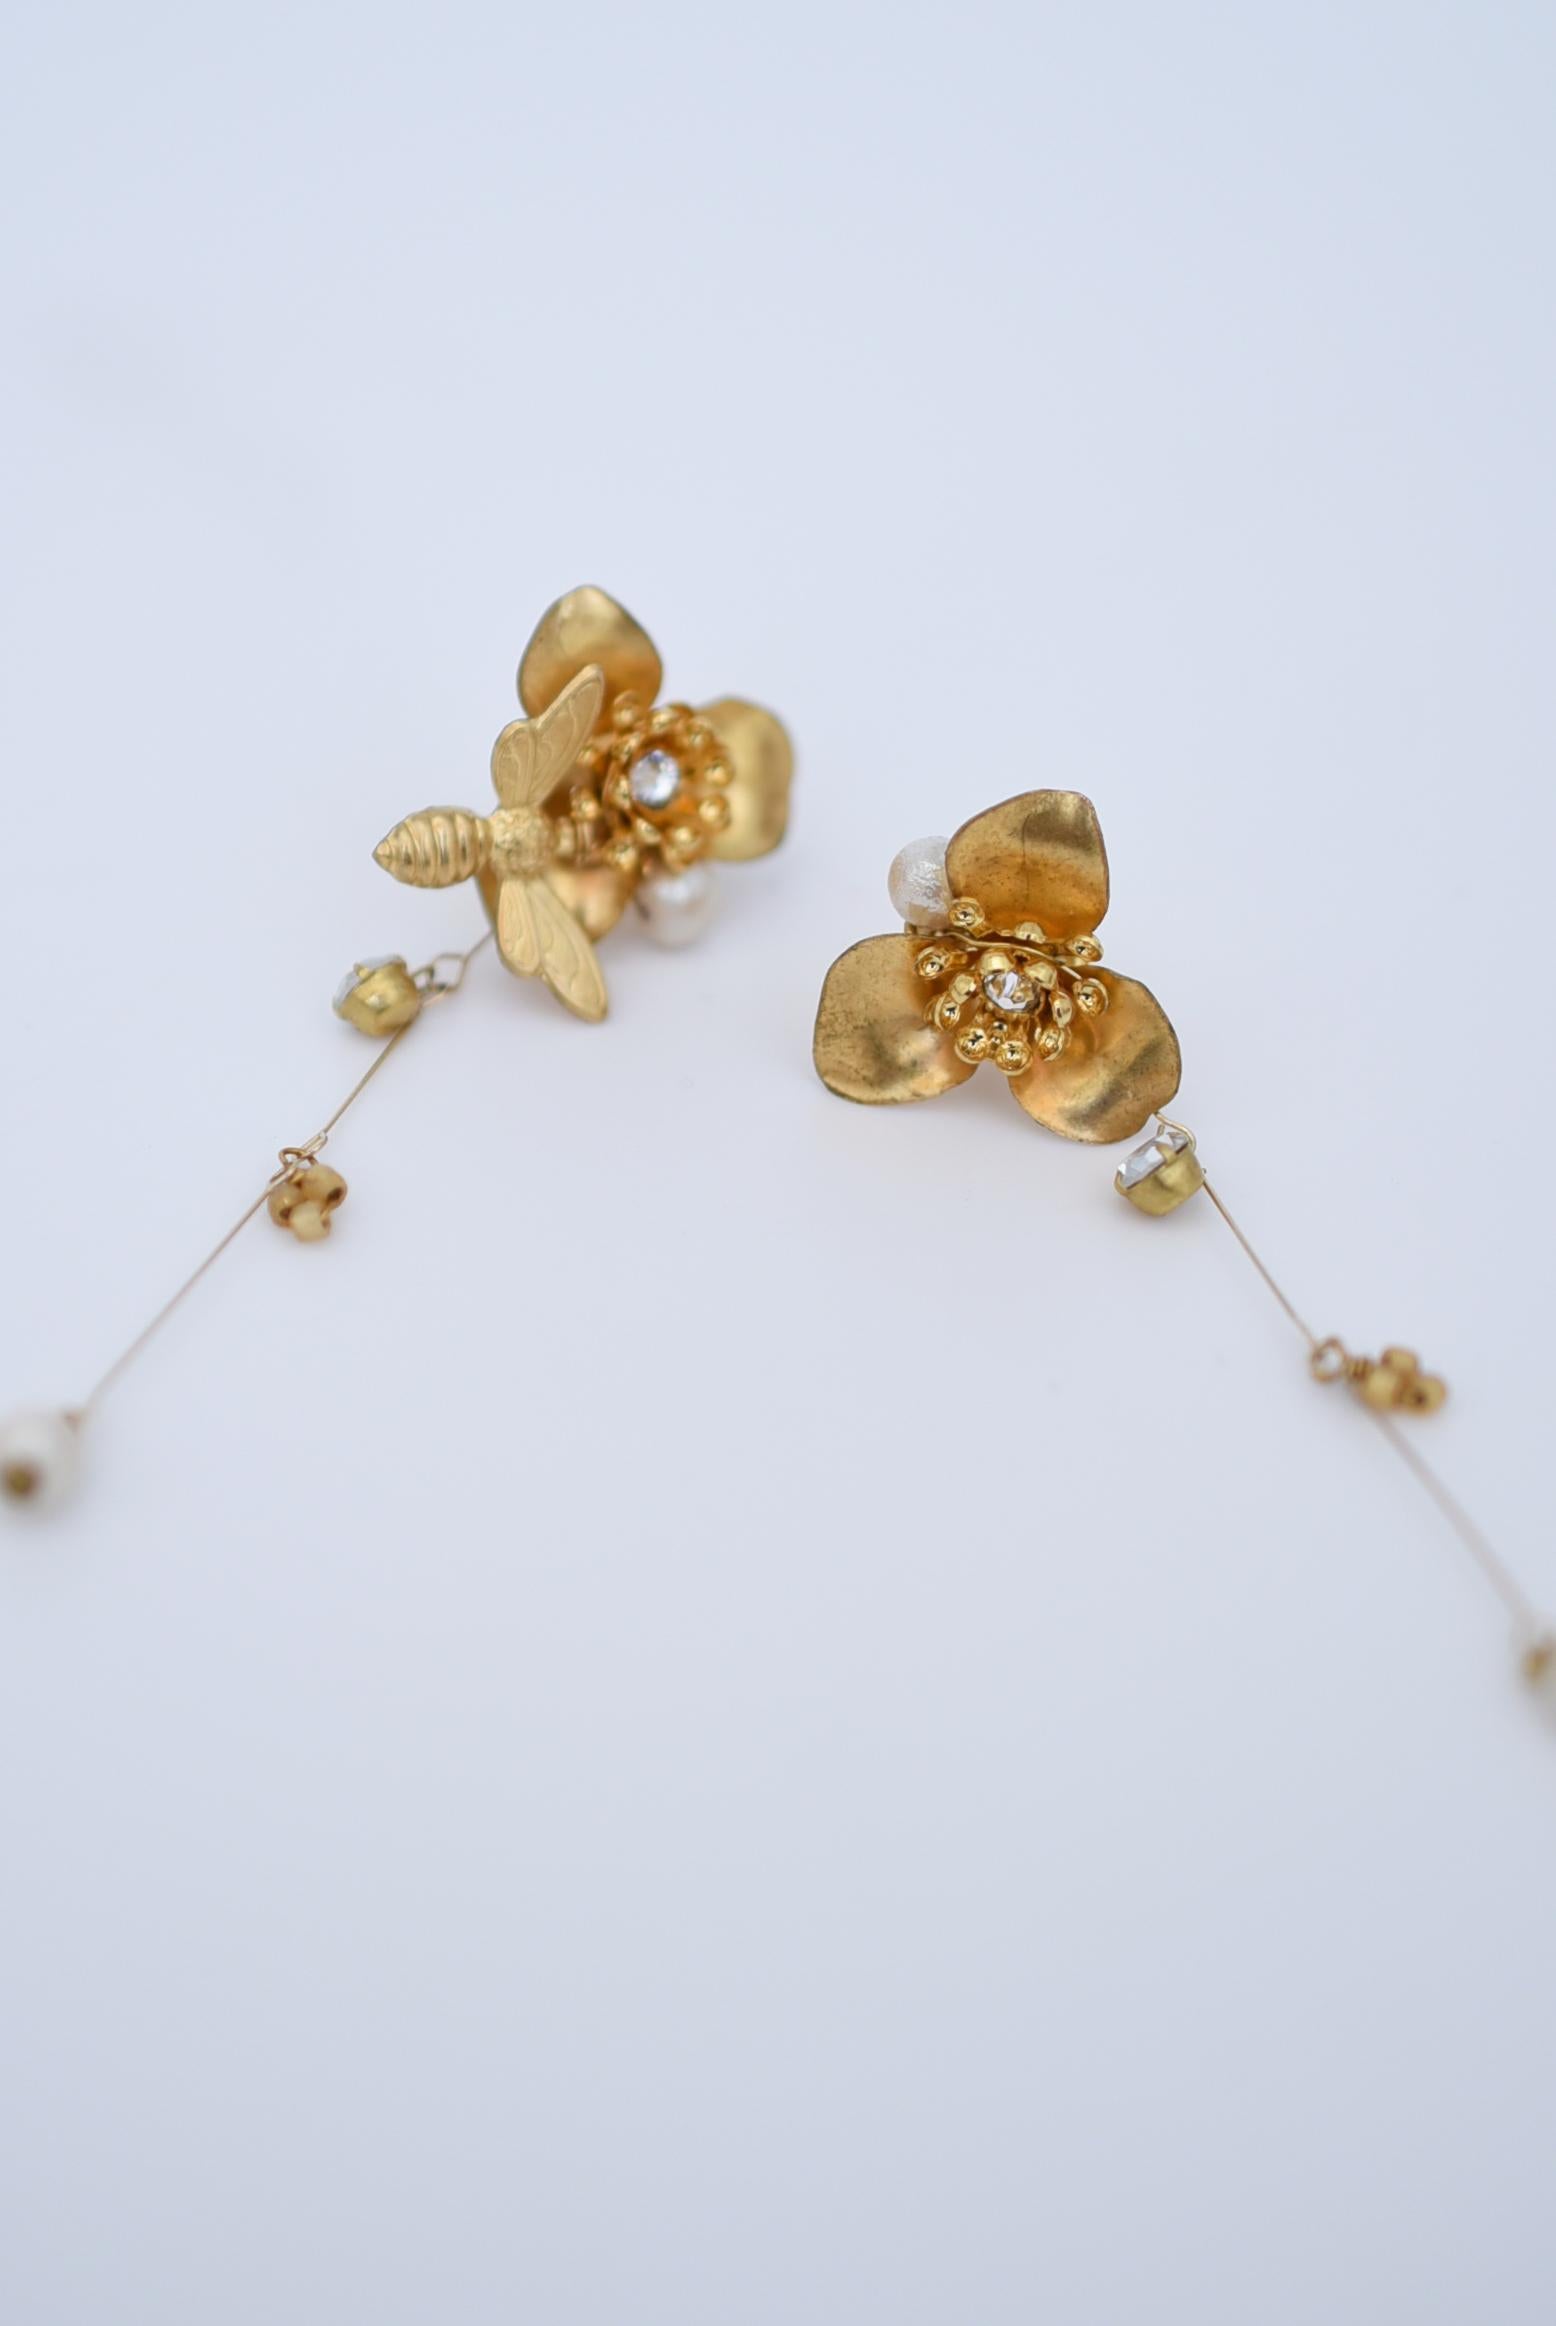 material:wood pearl,1970’s American vintage parts,glass beads, brass, swarovski,stainless,german silver
size:length 4.3cm


The motif swings widely from beneath the autumnal orchid and bee motifs.
Between the lines are beads and crystal elements,